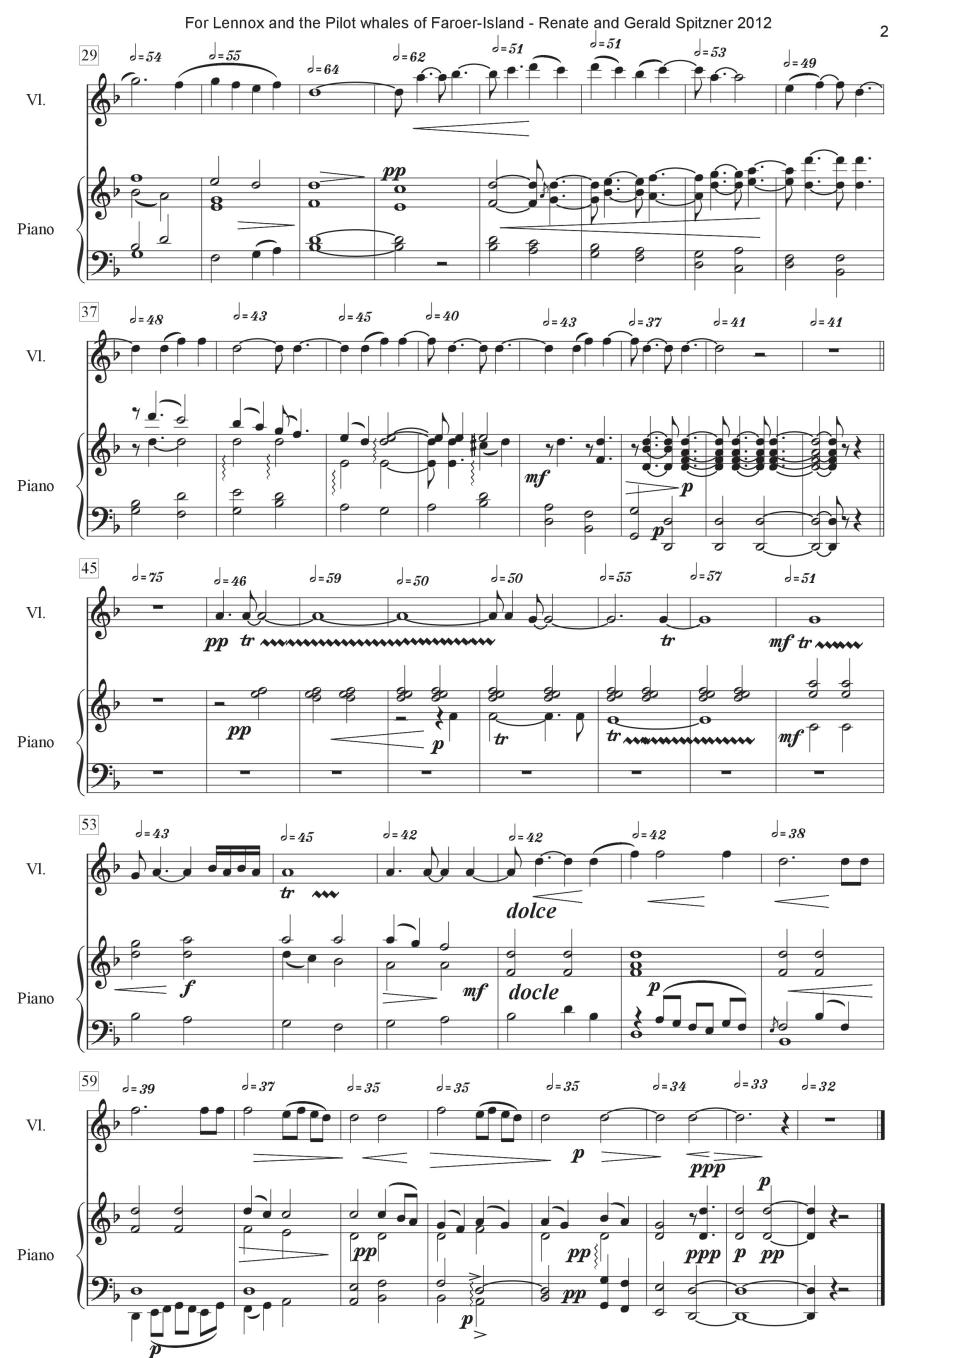 02 For Lennox and 43 Pilot whales - Violin and Piano RGS.pdf1